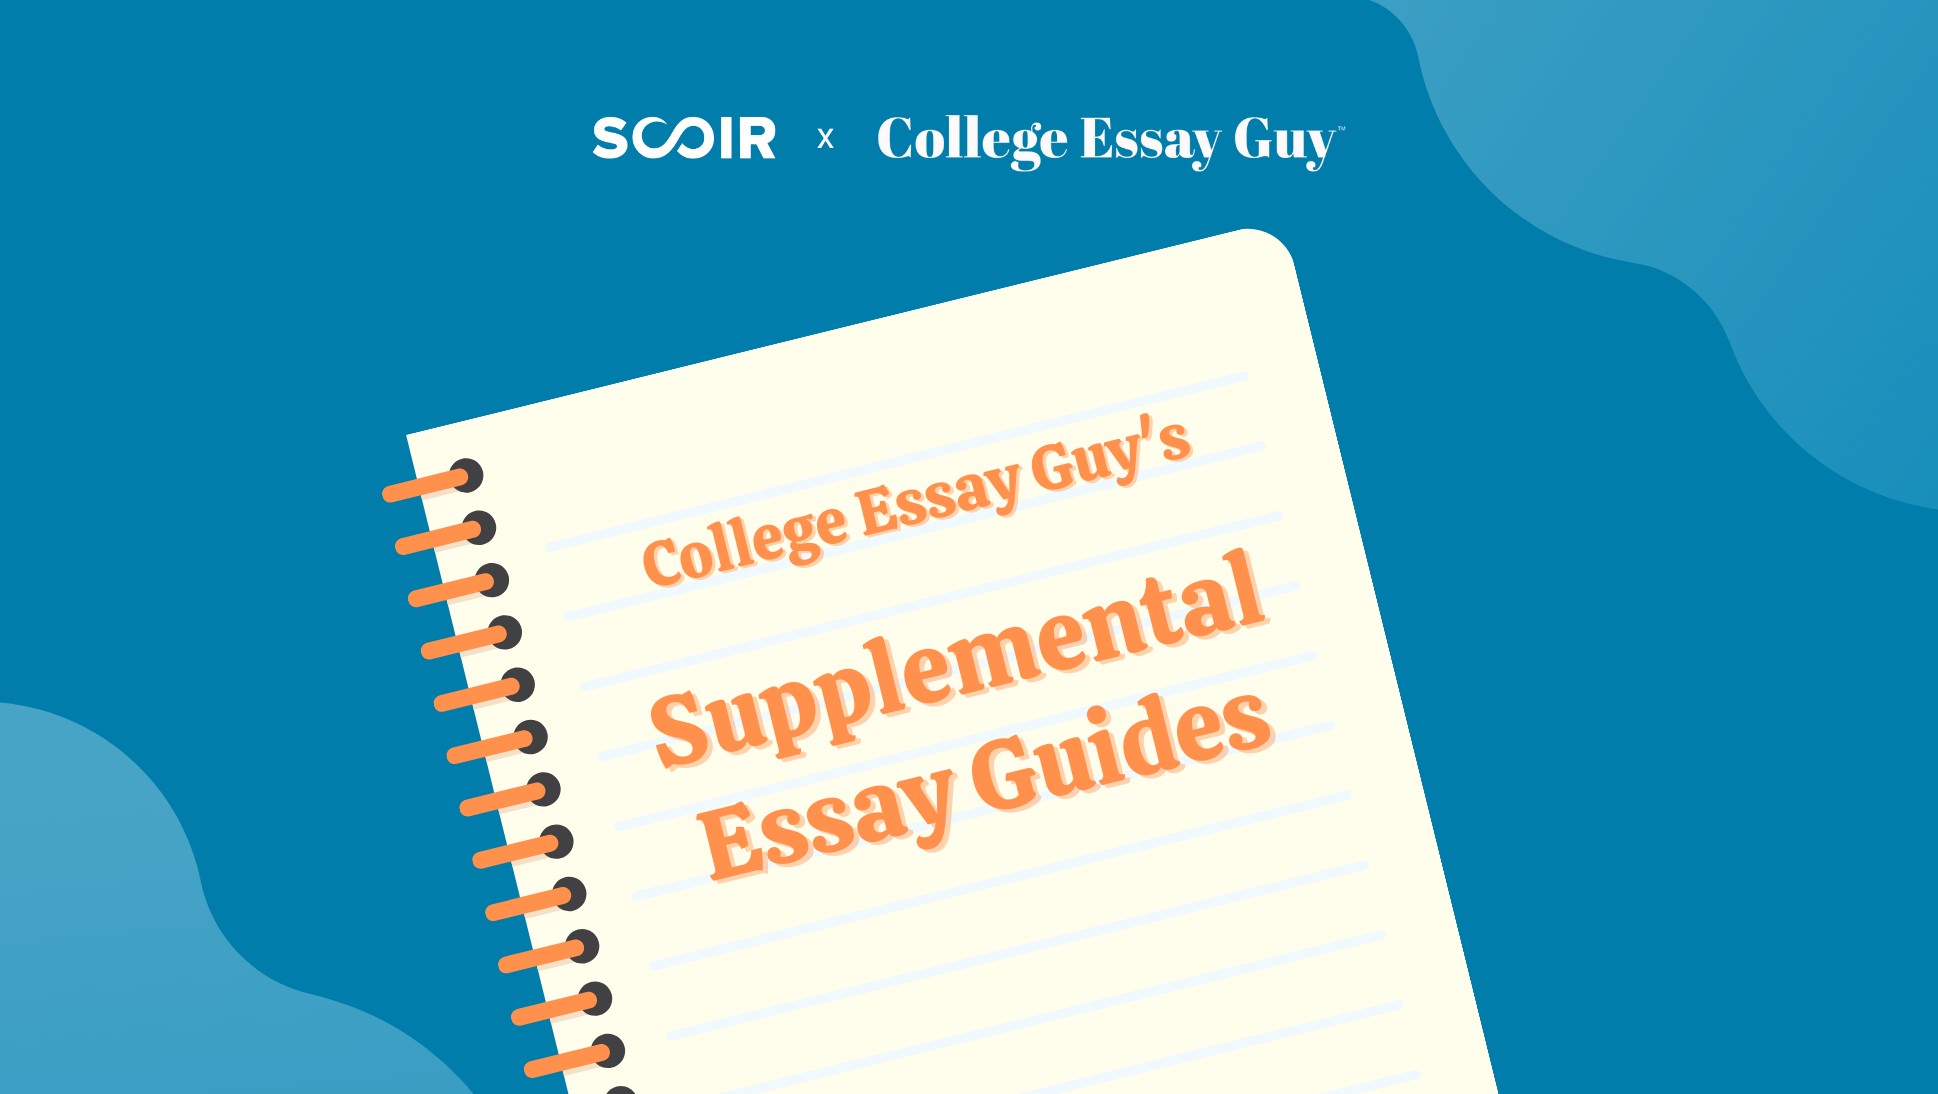 Supplemental Essay Guides from College Essay Guy